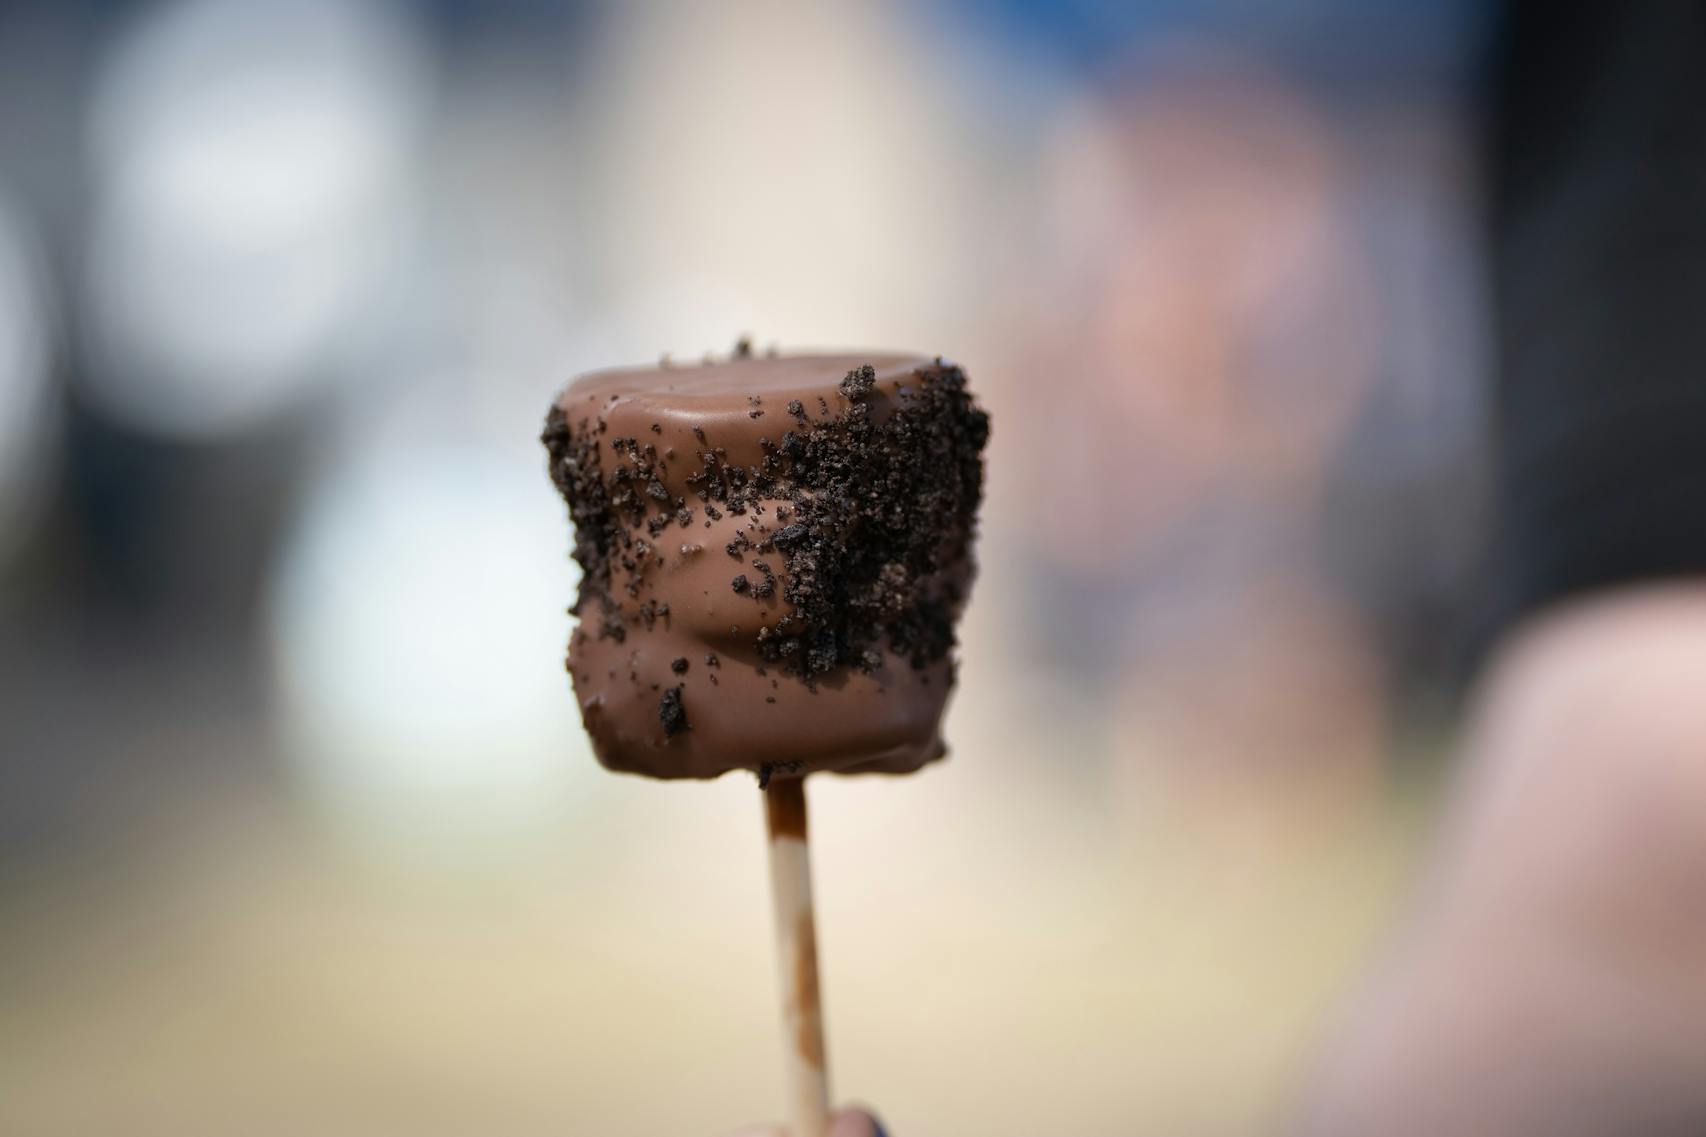 Oreo Classic cookie dough on-a-stick from Kora’s Cookie Dough. New foods at the Minnesota State Fair photographed on Thursday, Aug. 25, 2022 in Falcon Heights, Minn. ] RENEE JONES SCHNEIDER • renee.jones@startribune.com